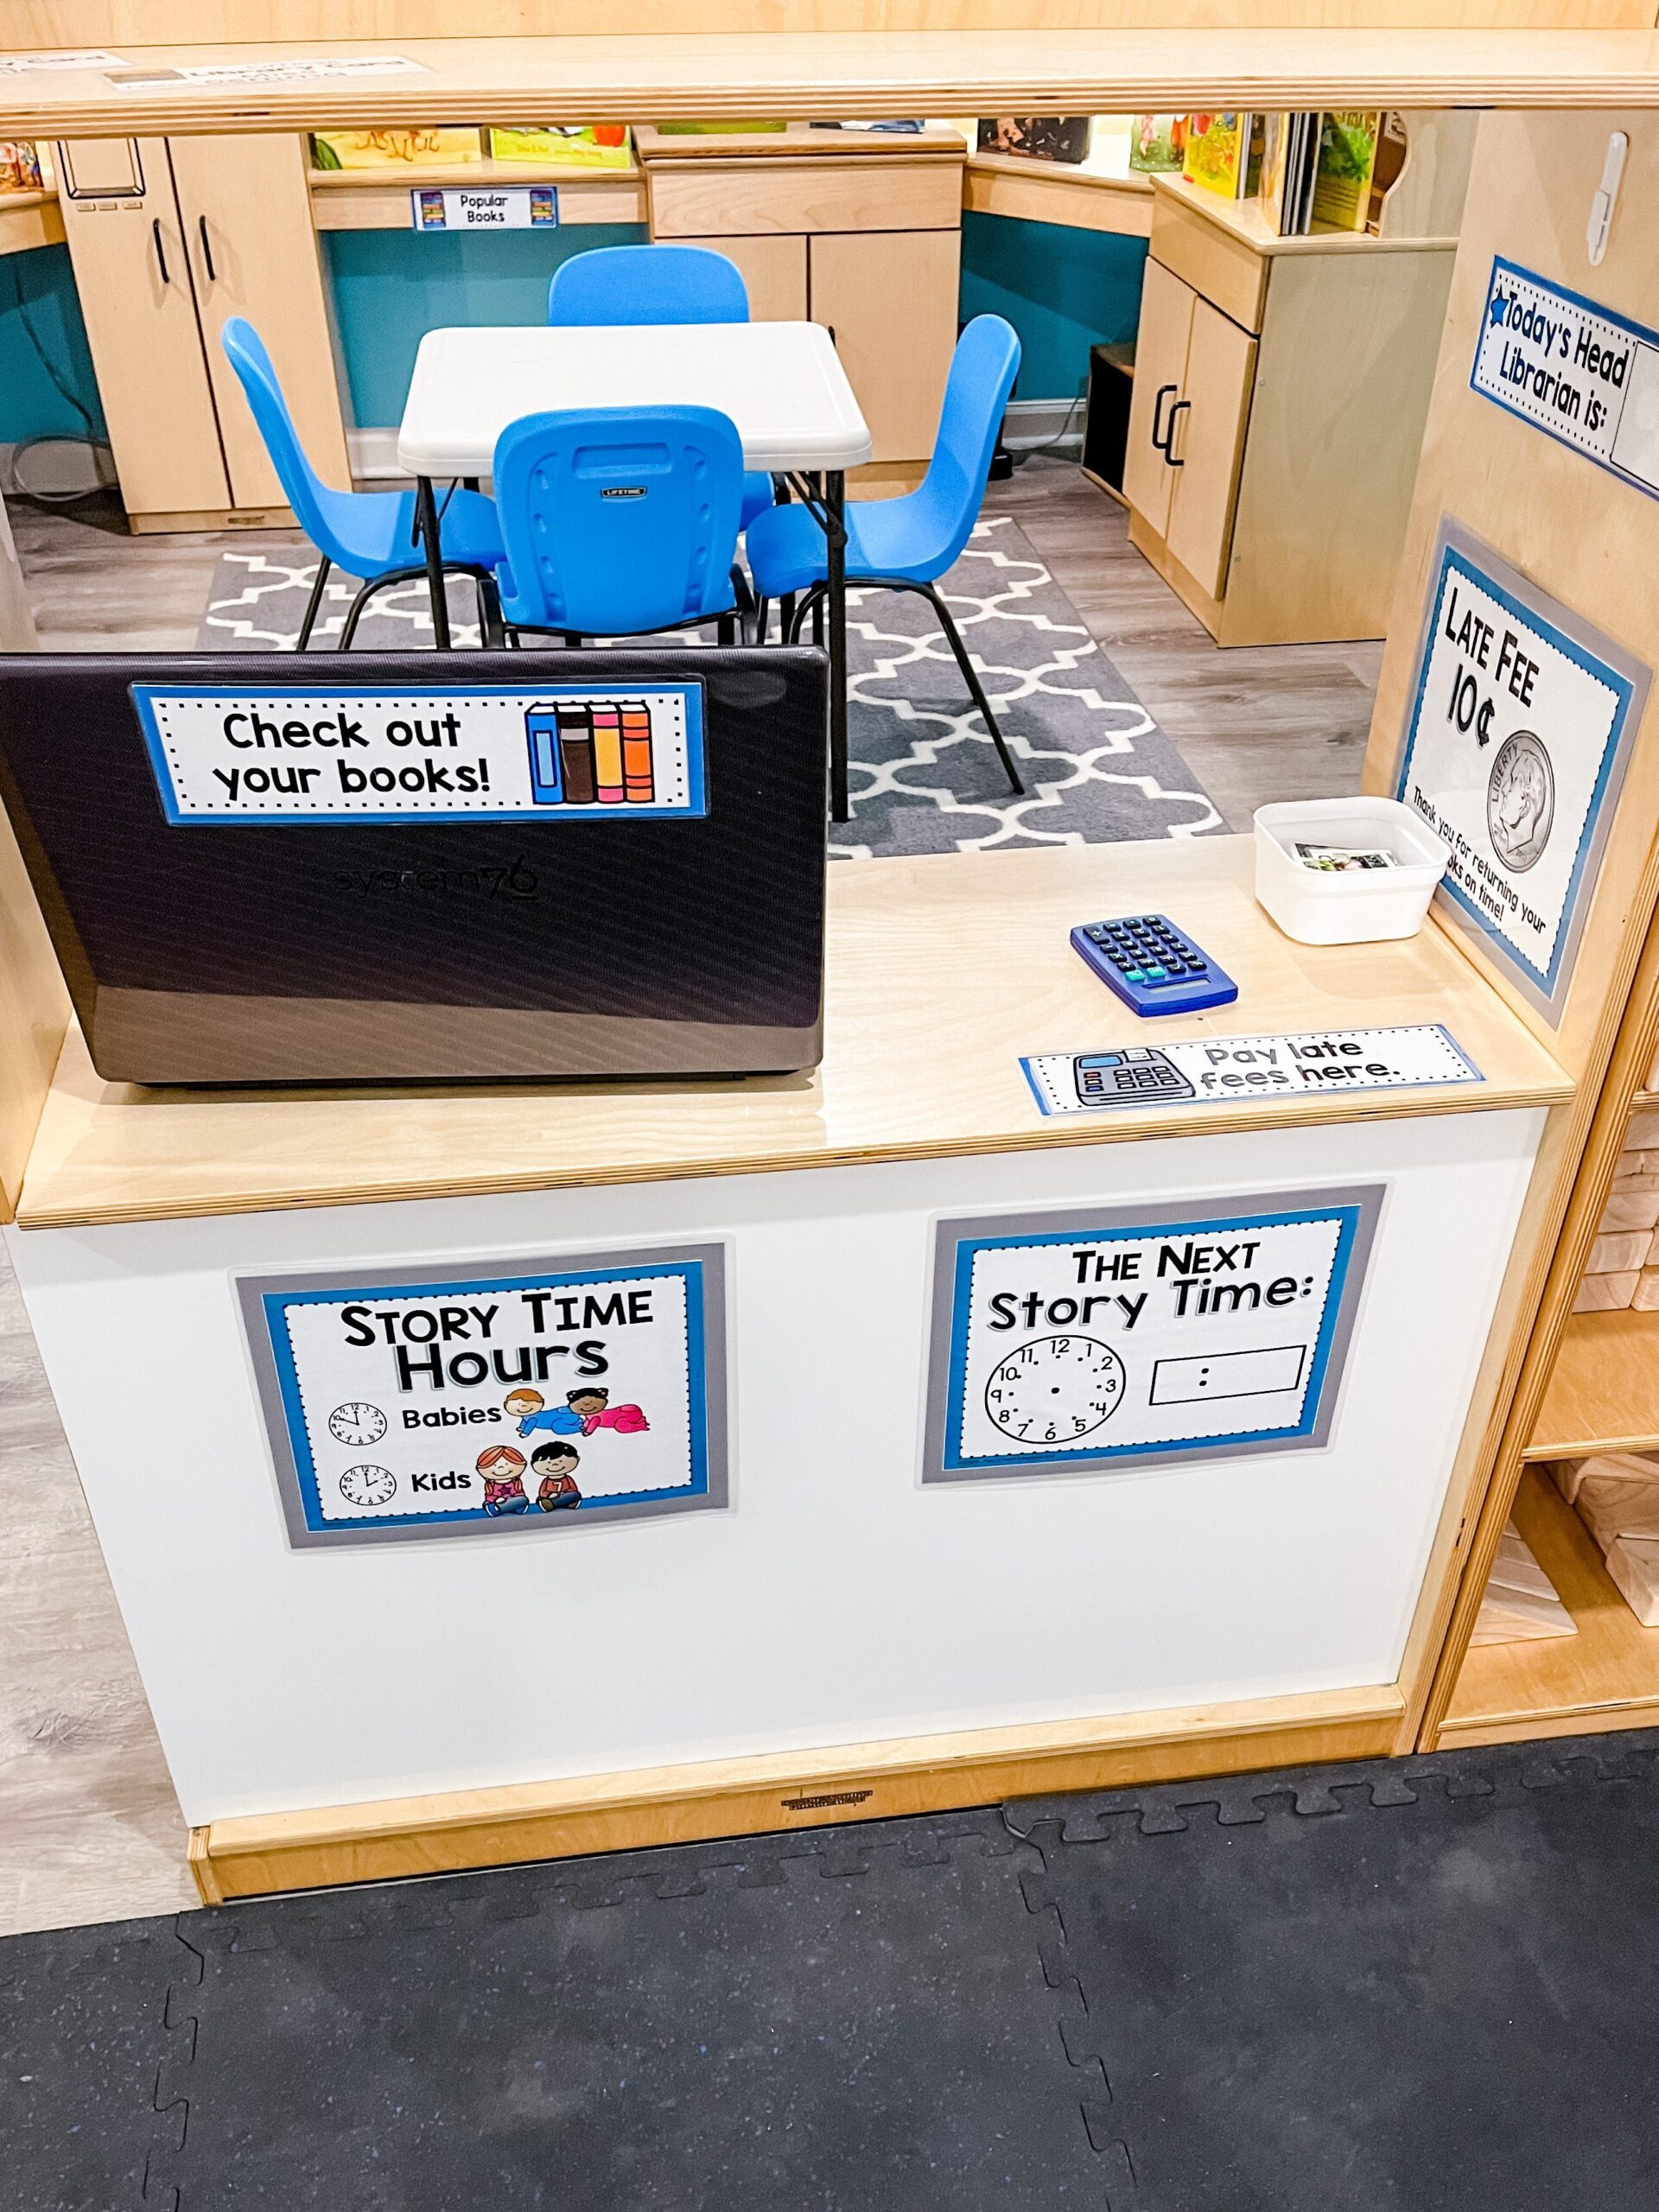 preschool library dramatic play center with computer to check out books
